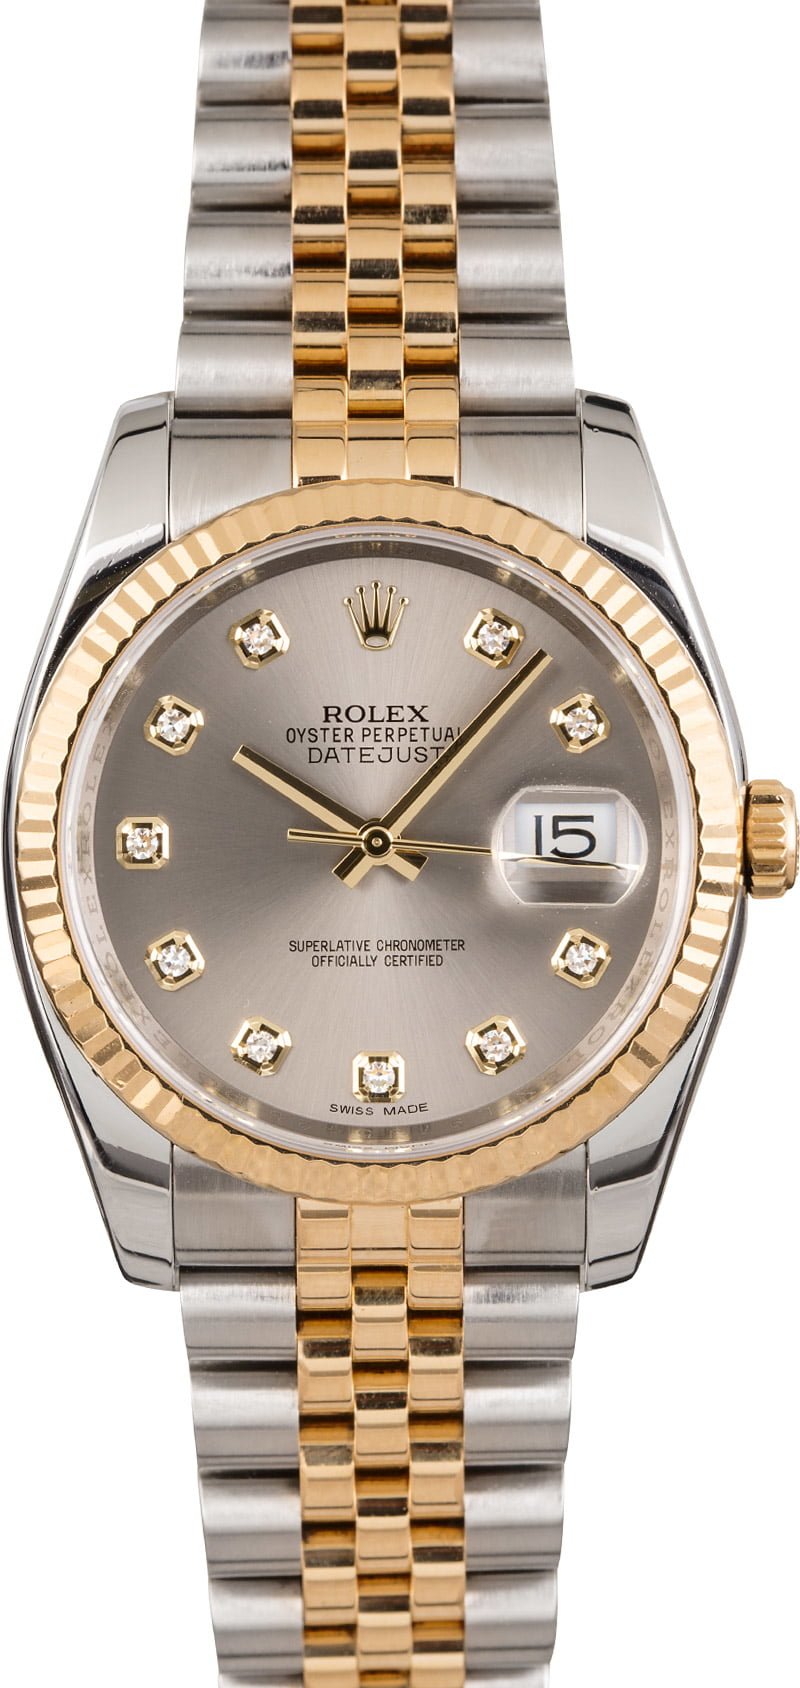 Rolex Oyster Perpetual Datejust Model | My XXX Hot Girl